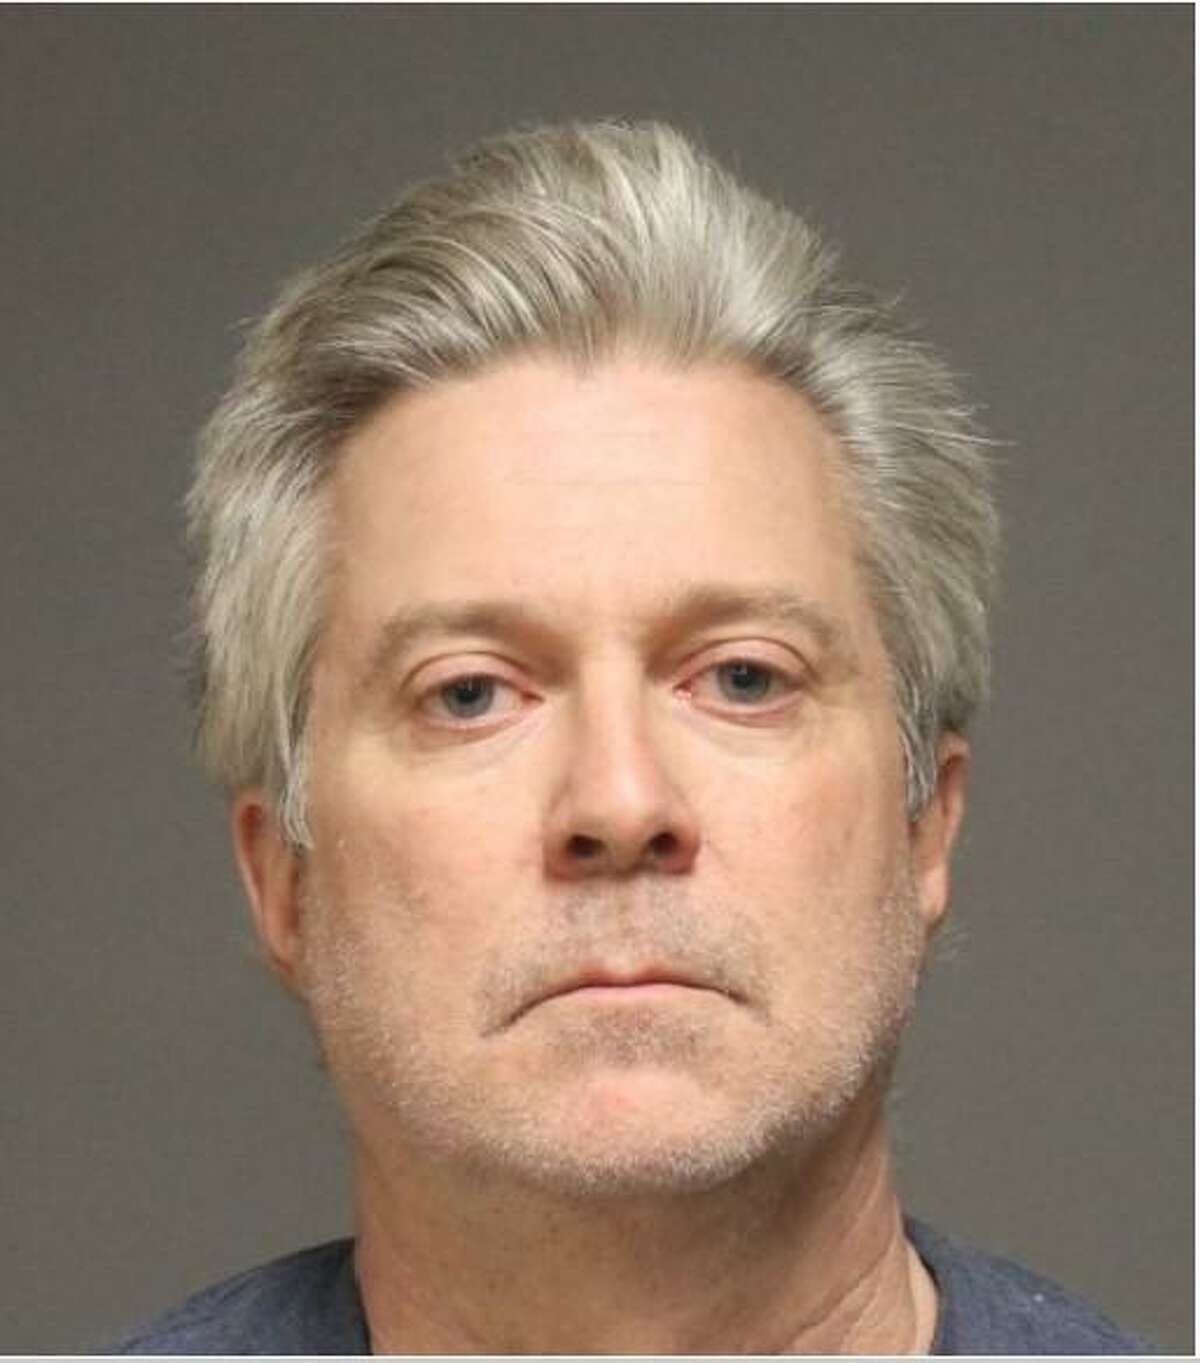 Stephen Saint Raymond, 58, of Bridgeport was charged with second-degree intimidation based on bigotry/bias and second-degree breach of peace last week.